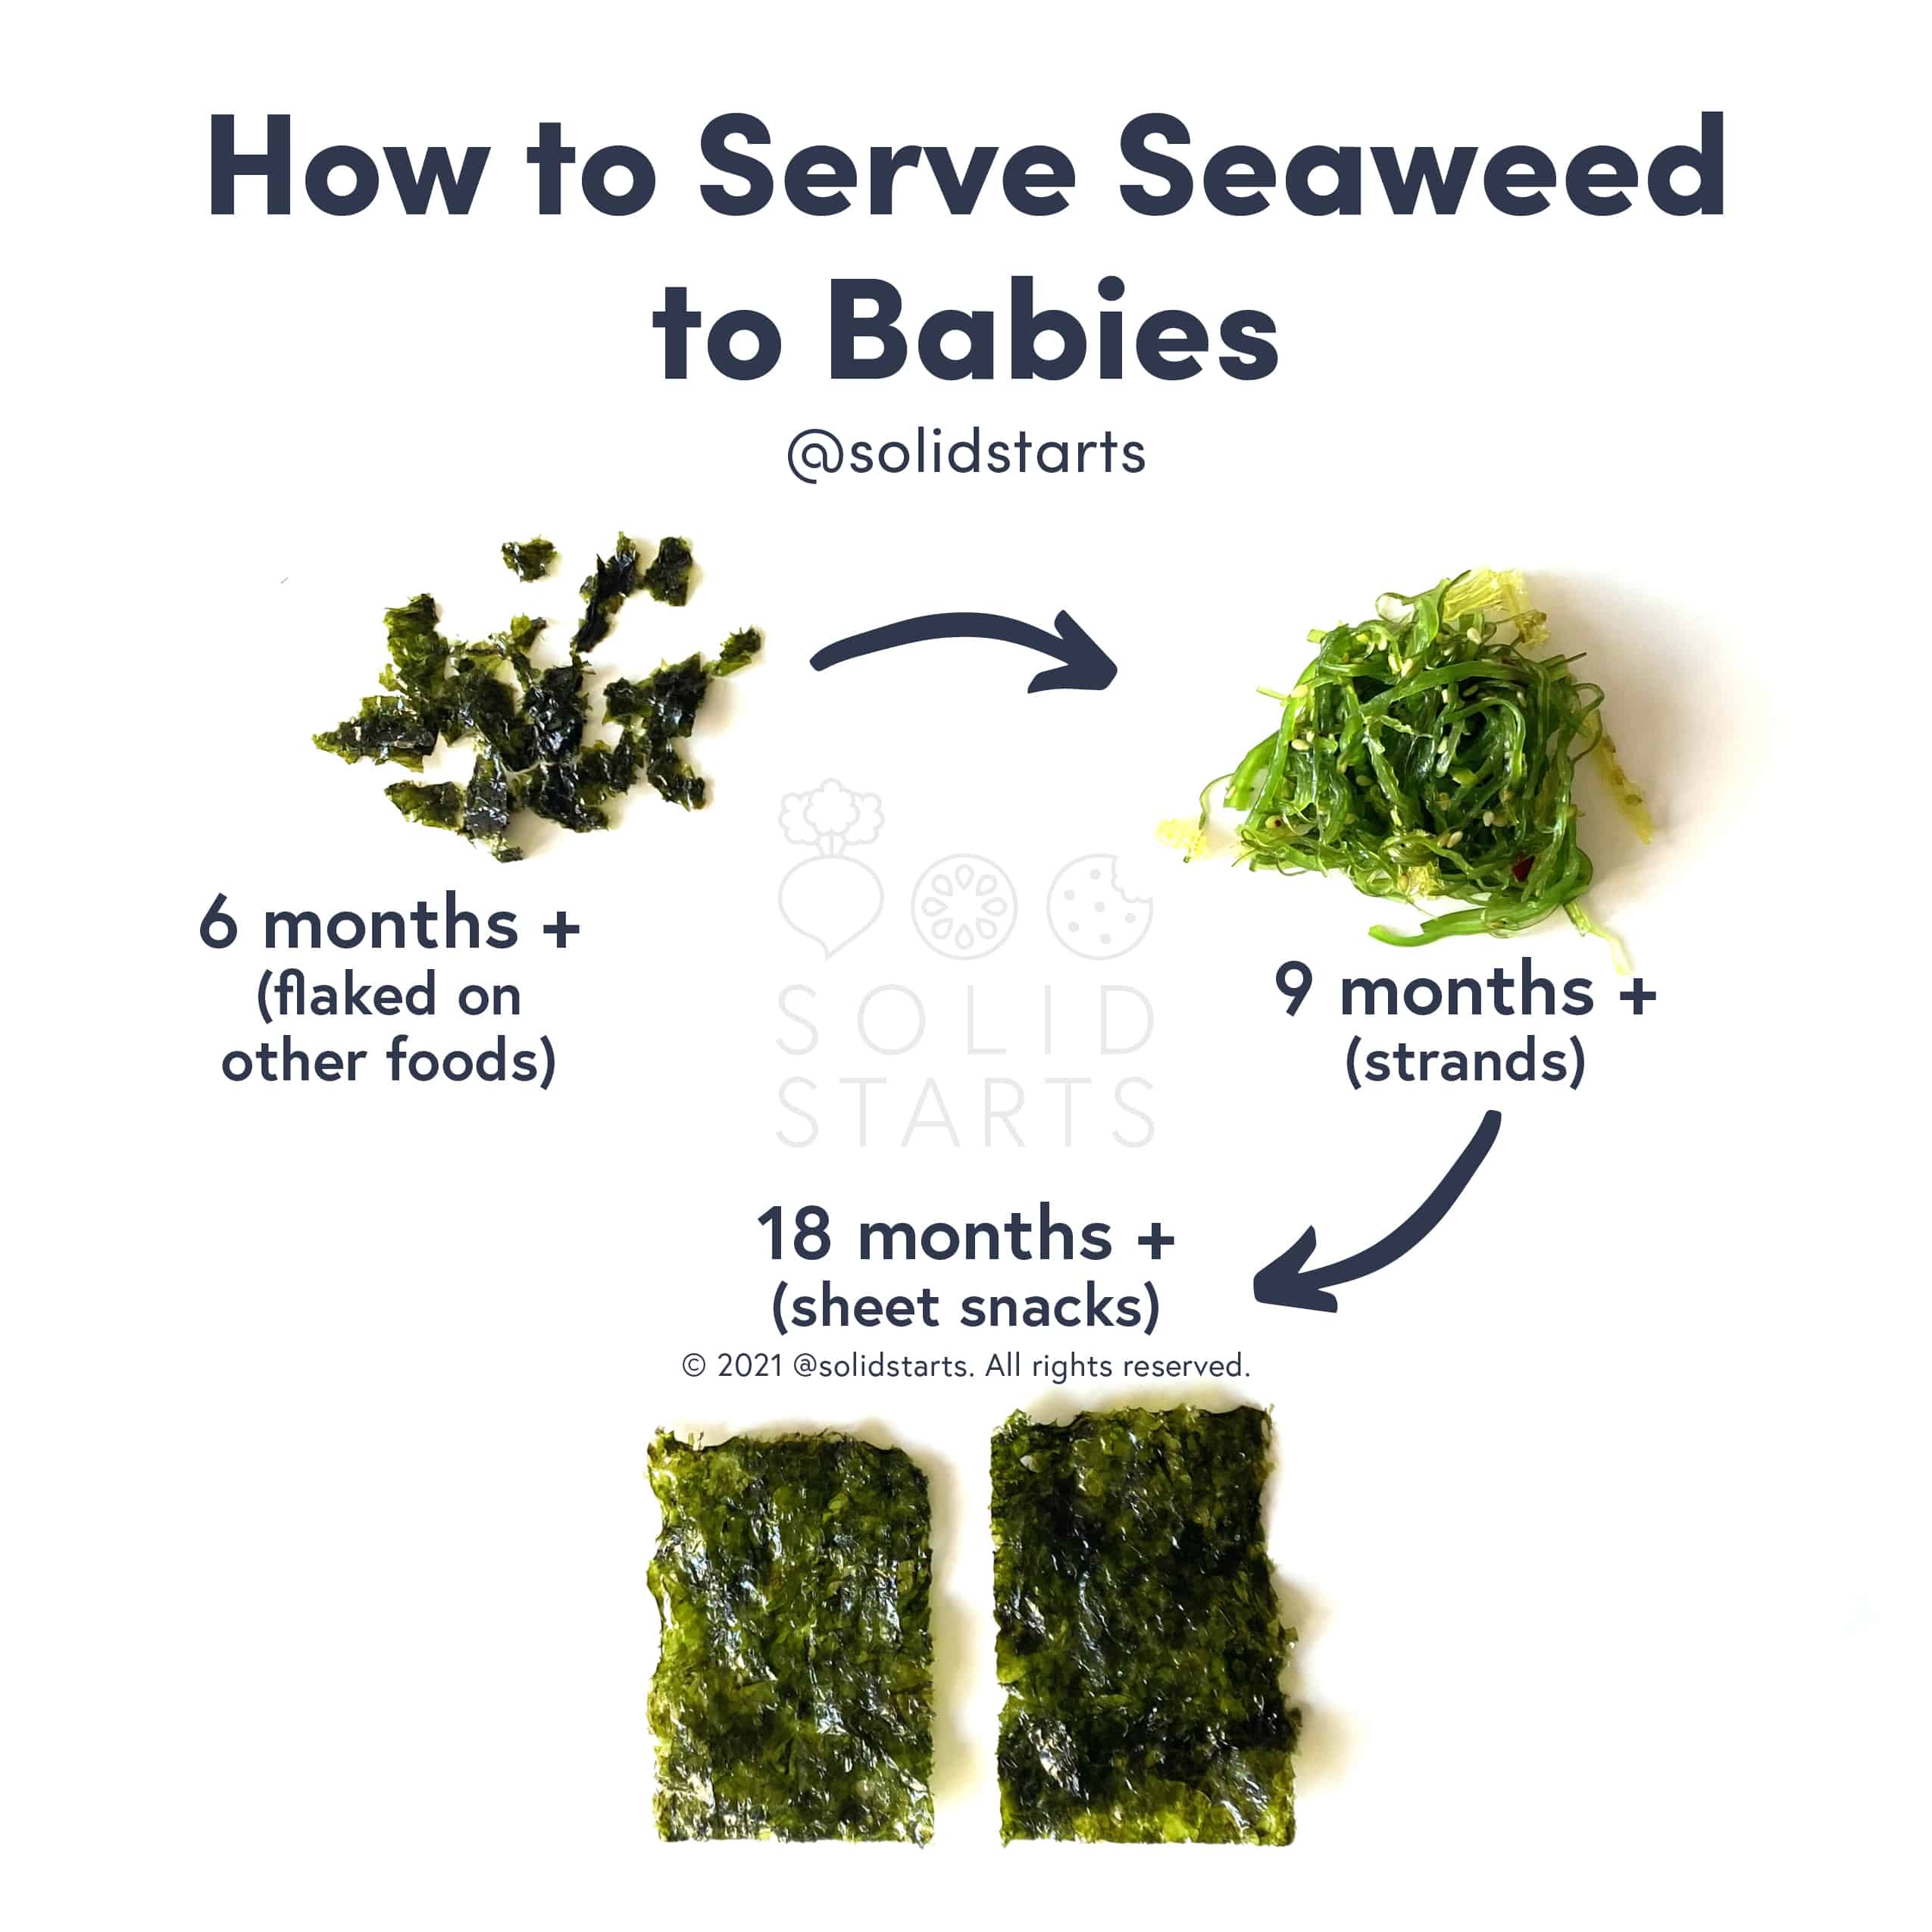 How to Serve Seaweed to Babies